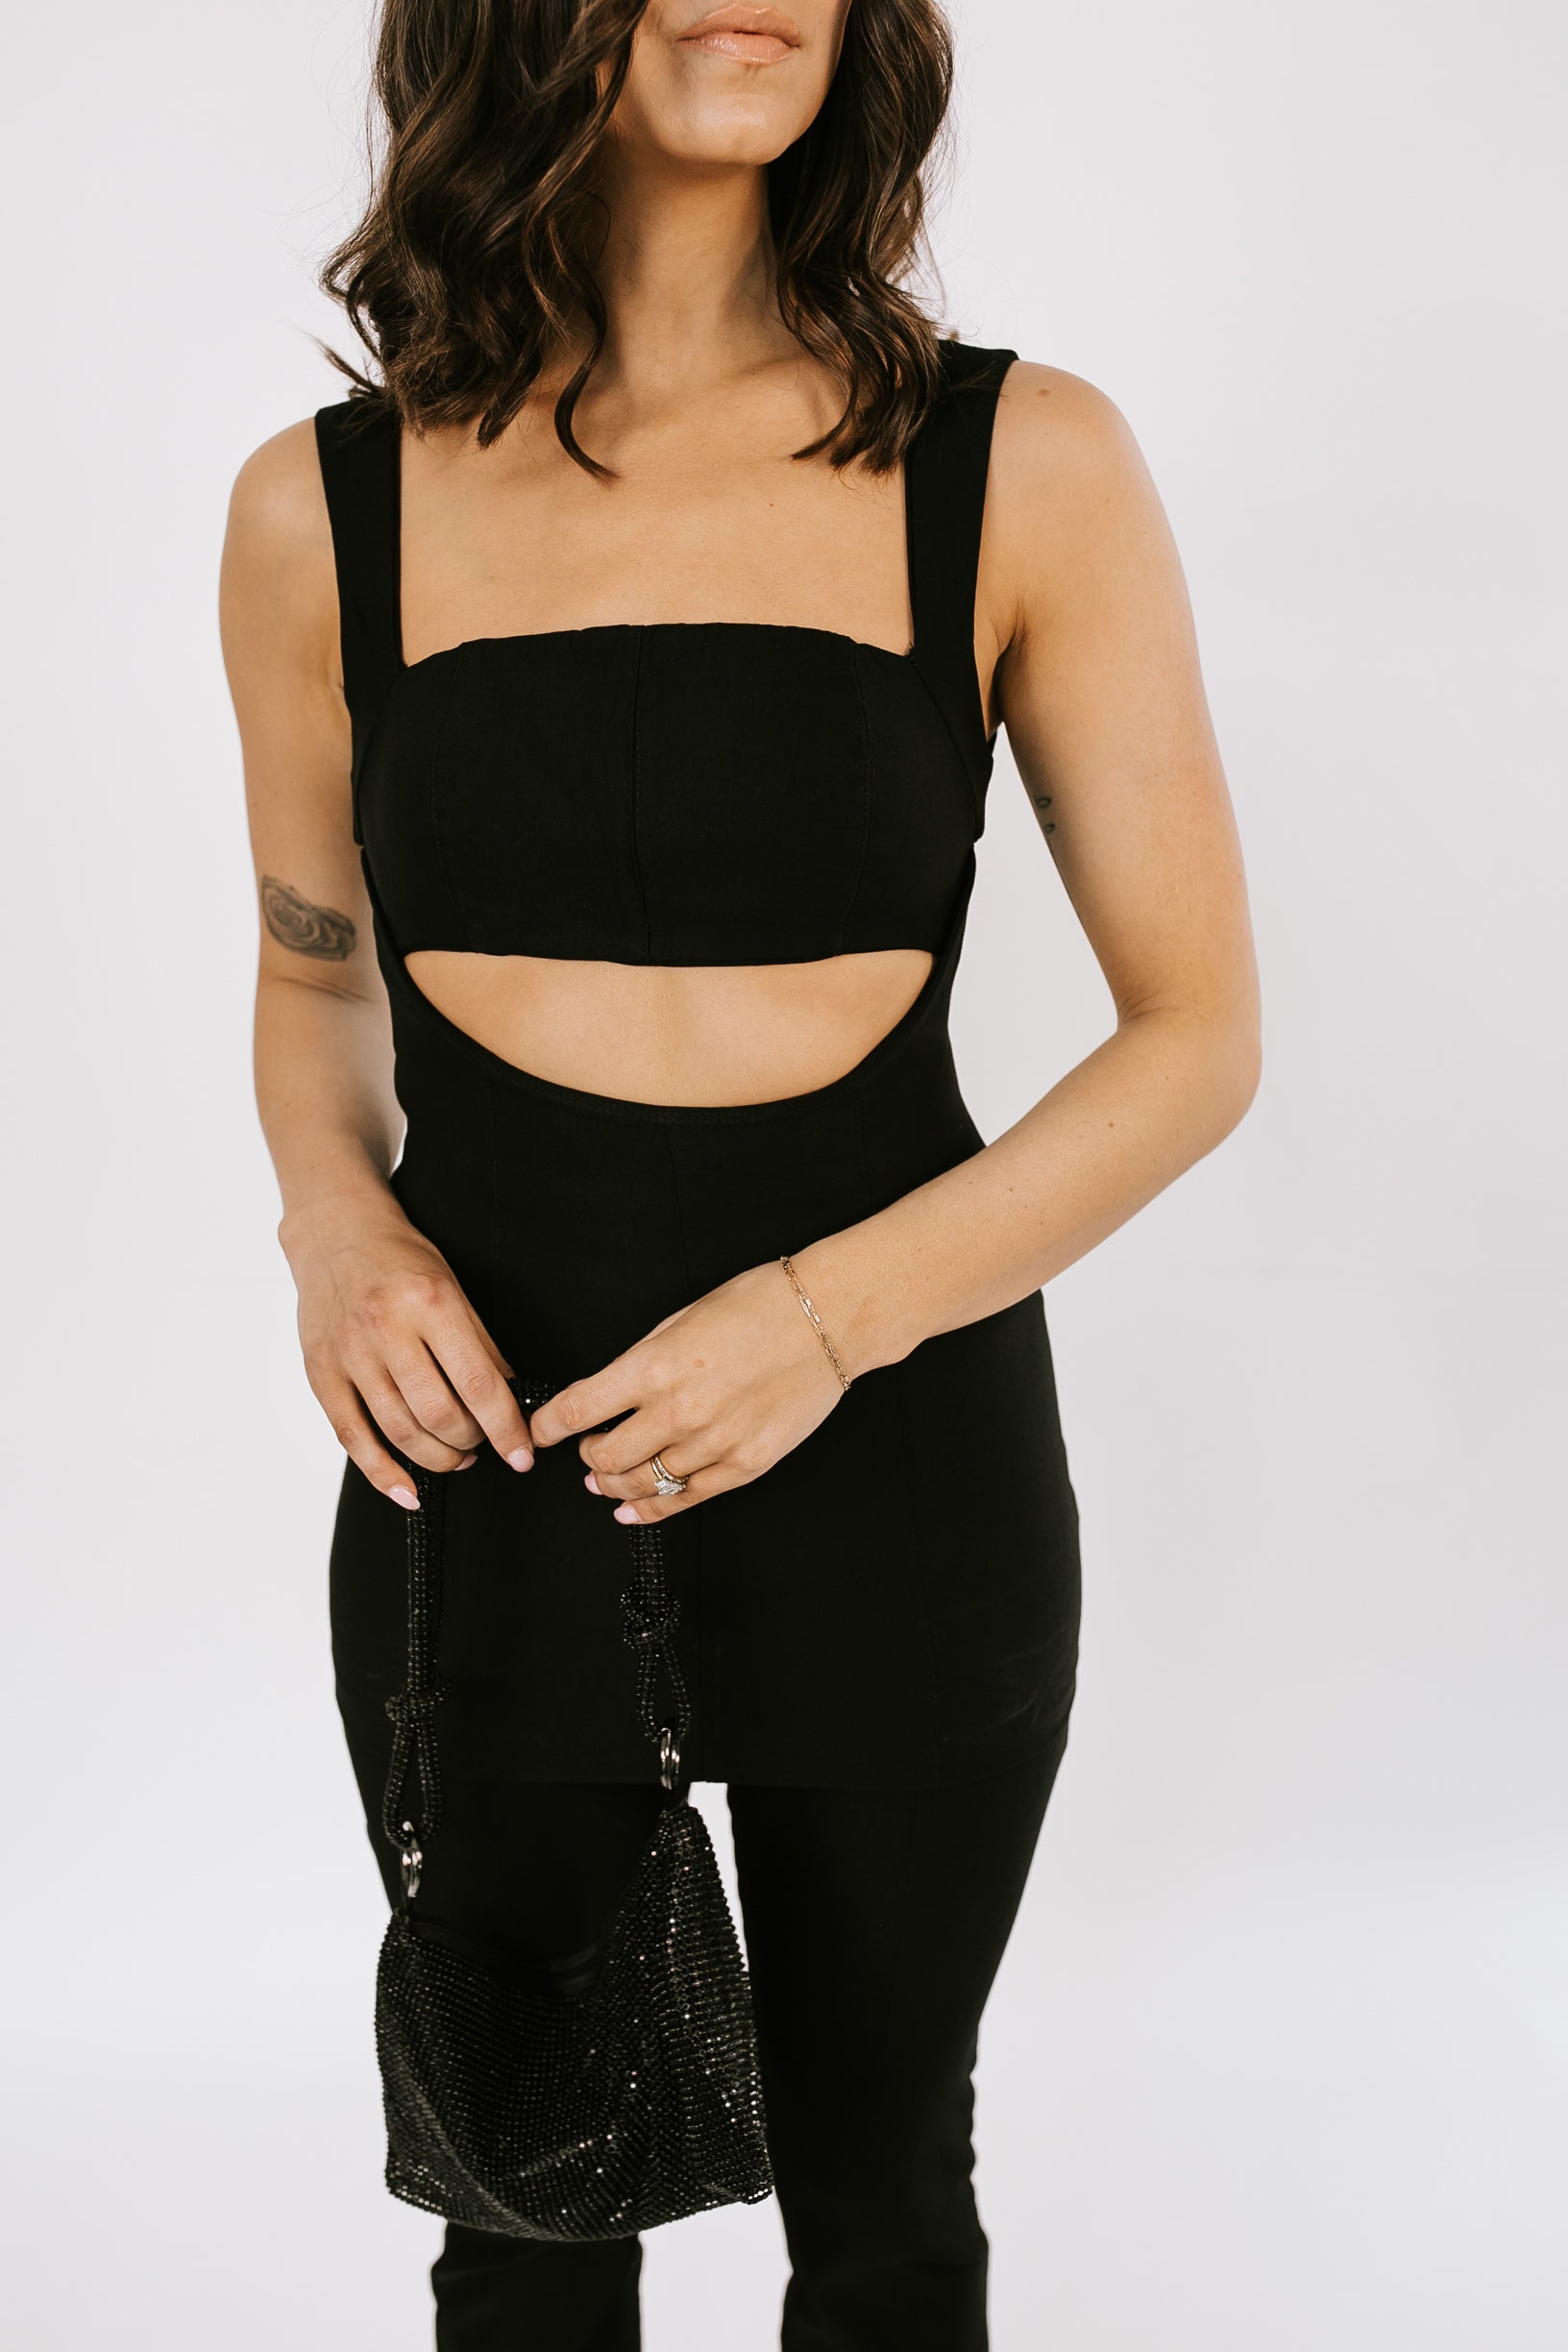 Yours Truly Tank Top + Pant Set - Black